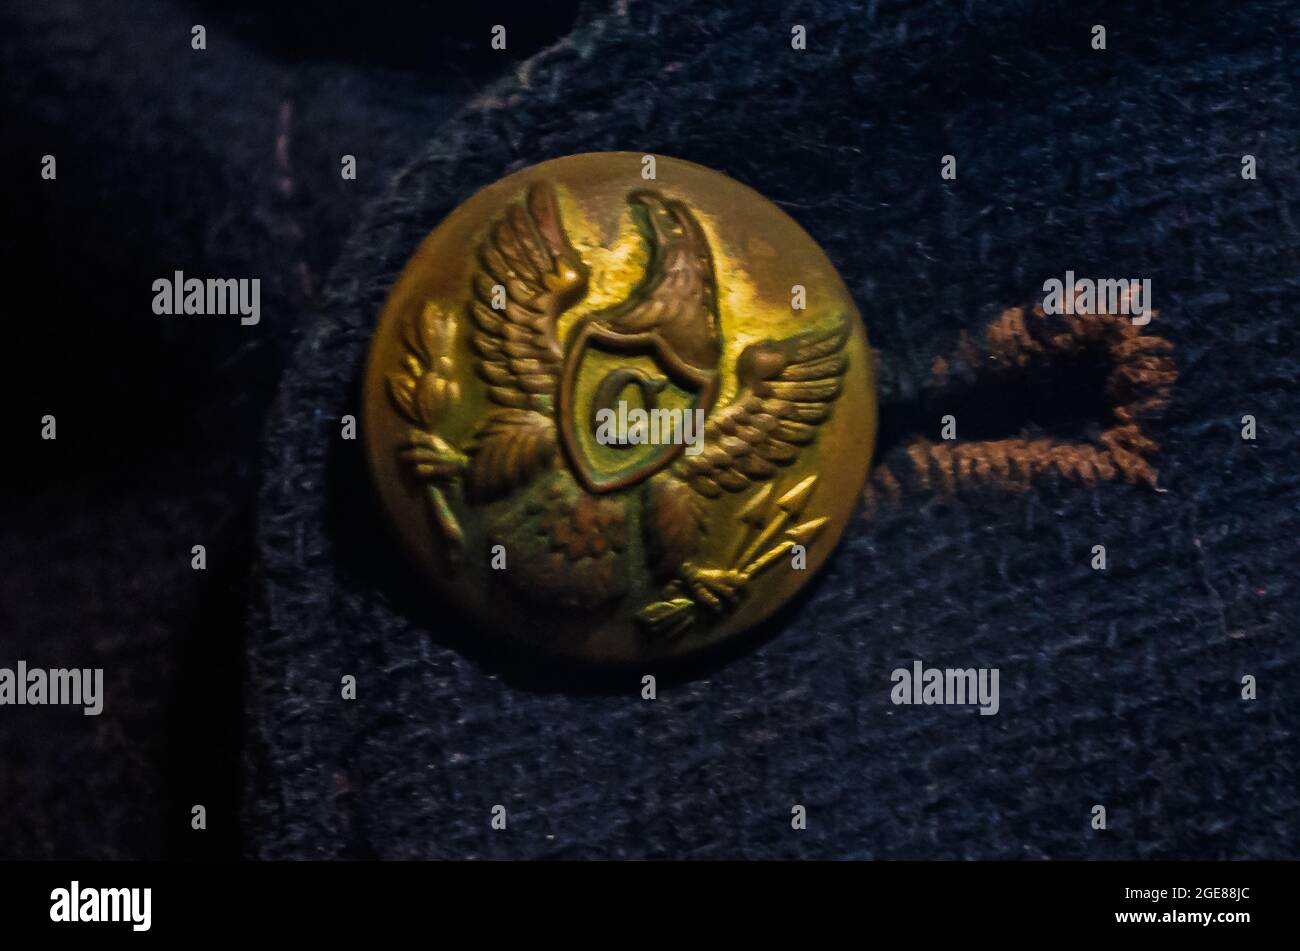 A button on a Federal soldier’s uniform depicts an eagle and a “C” representing the cavalry at the Fort Gaines museum in Dauphin Island, Alabama. Stock Photo